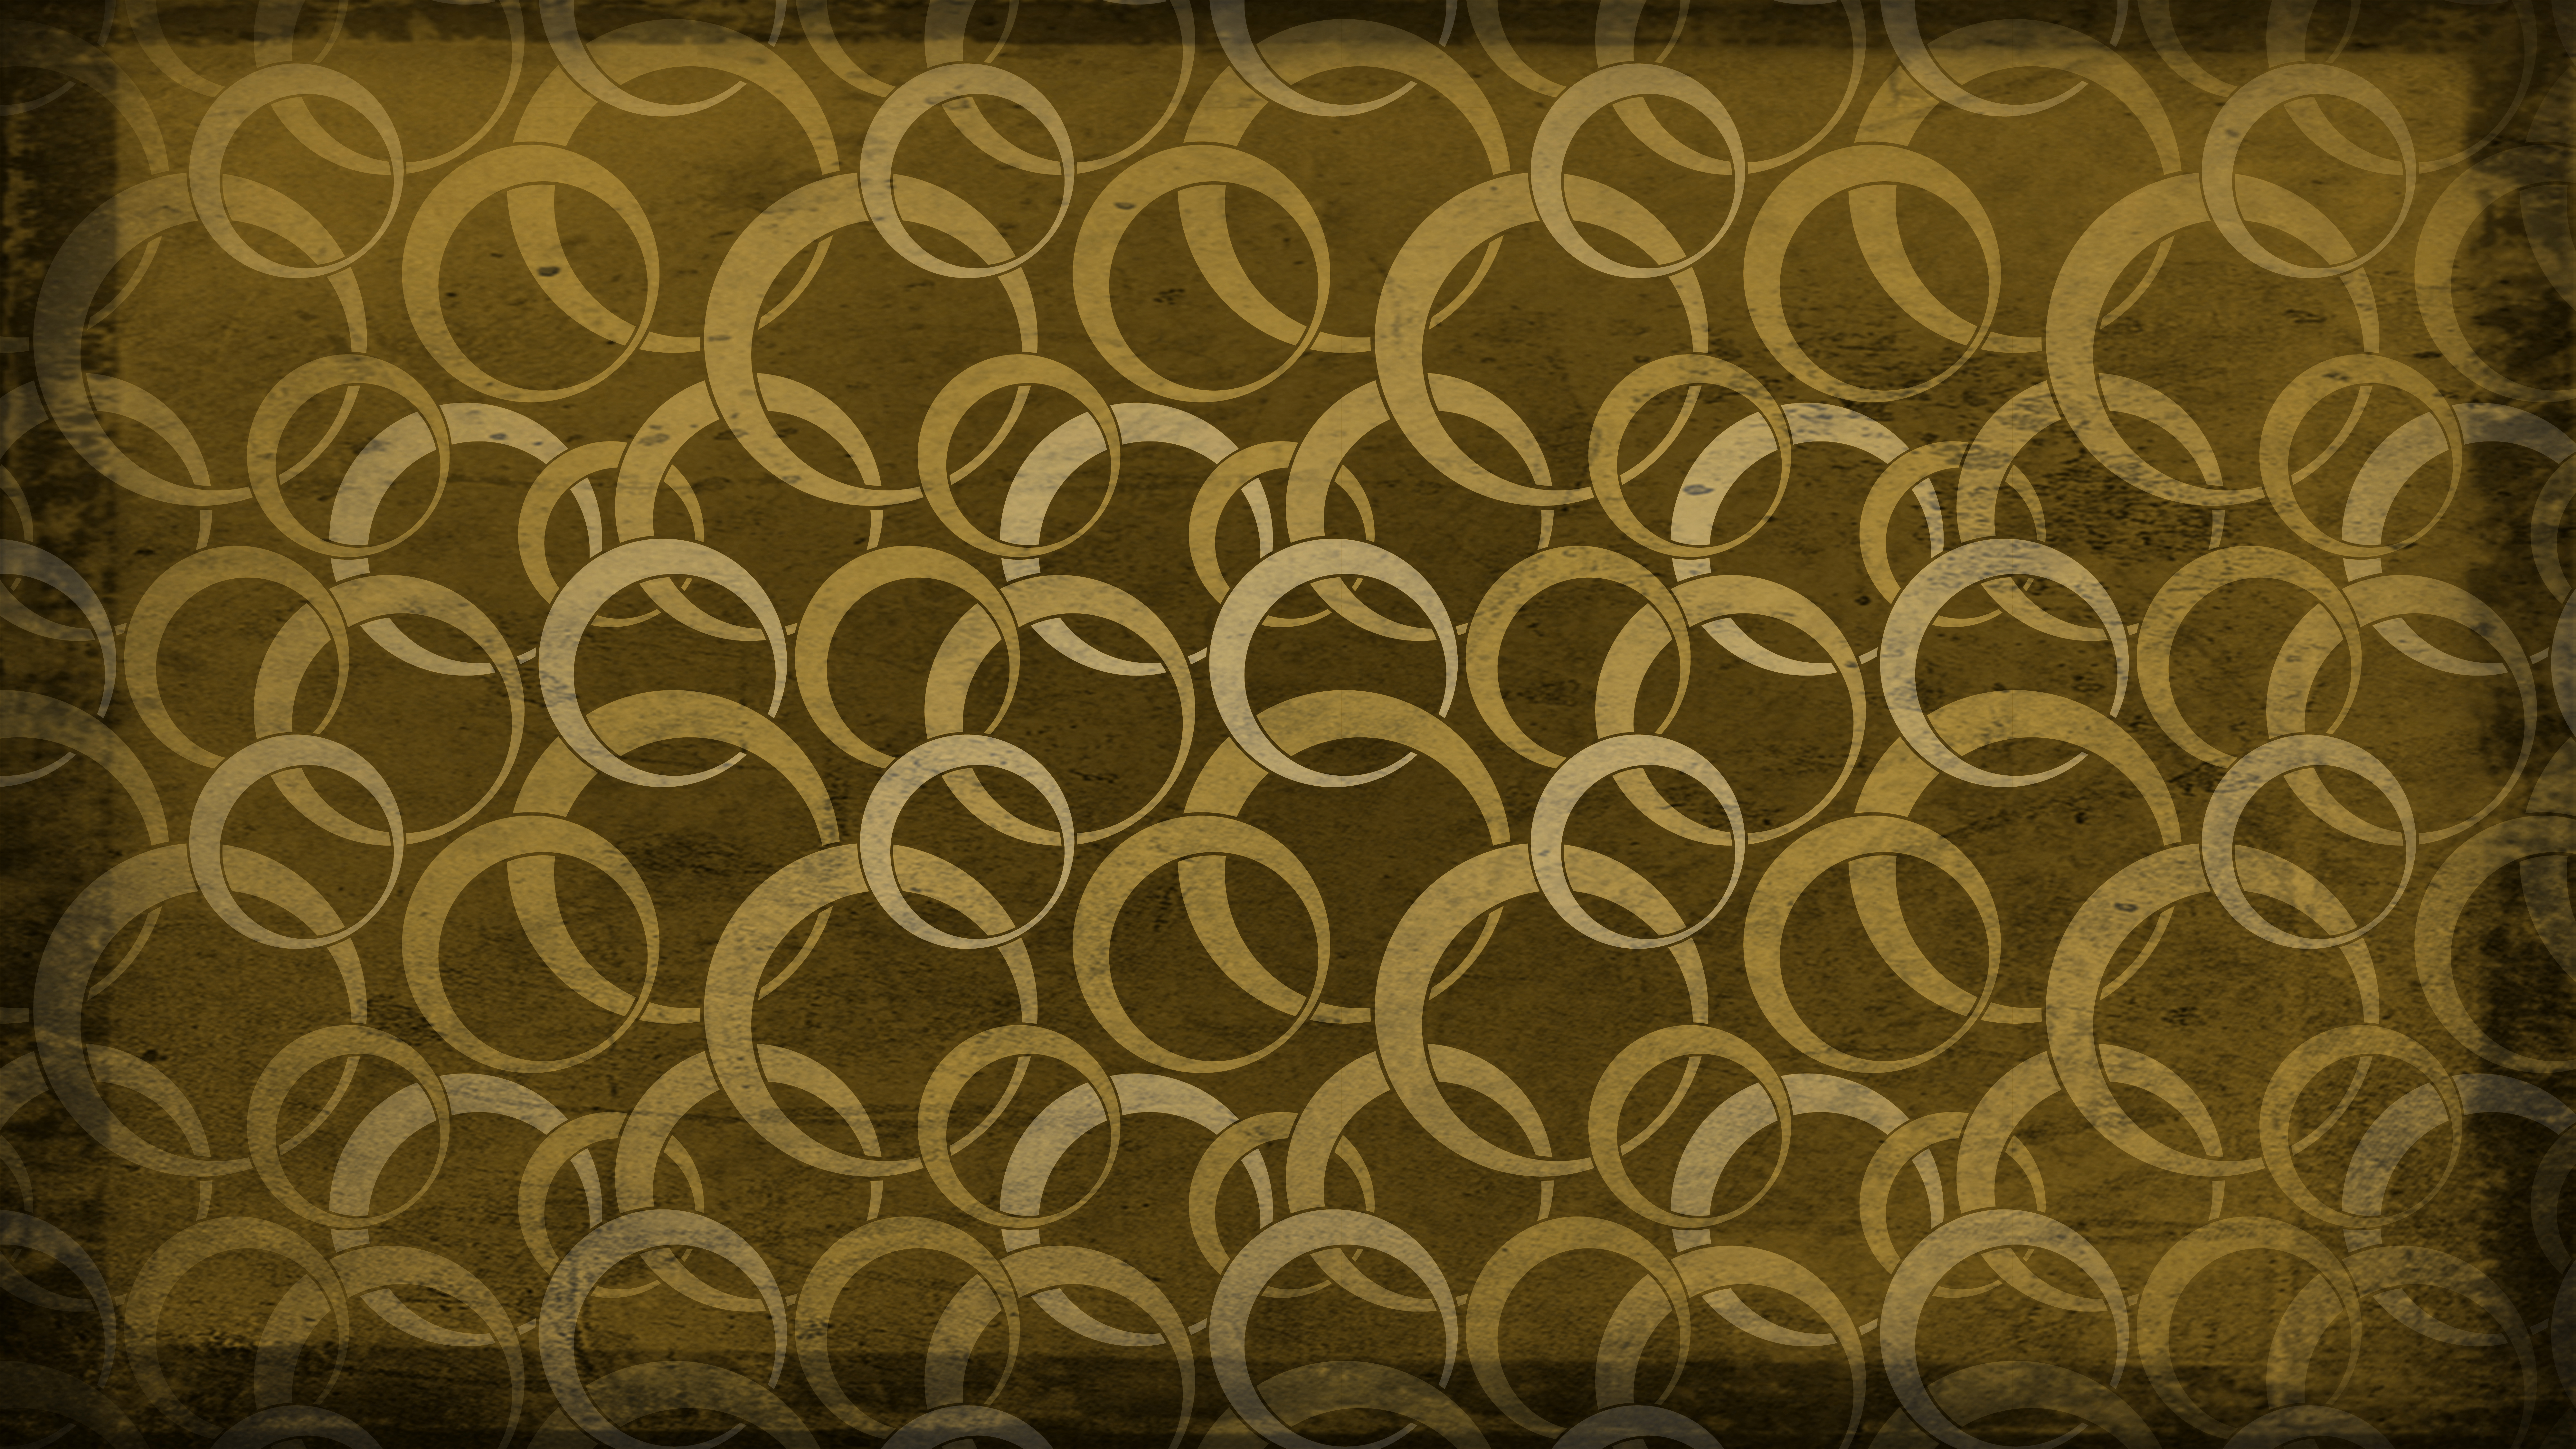 Brown And Gold Grunge Geometric Circle Pattern Wallpaper - Overlapping Circles Grid - HD Wallpaper 